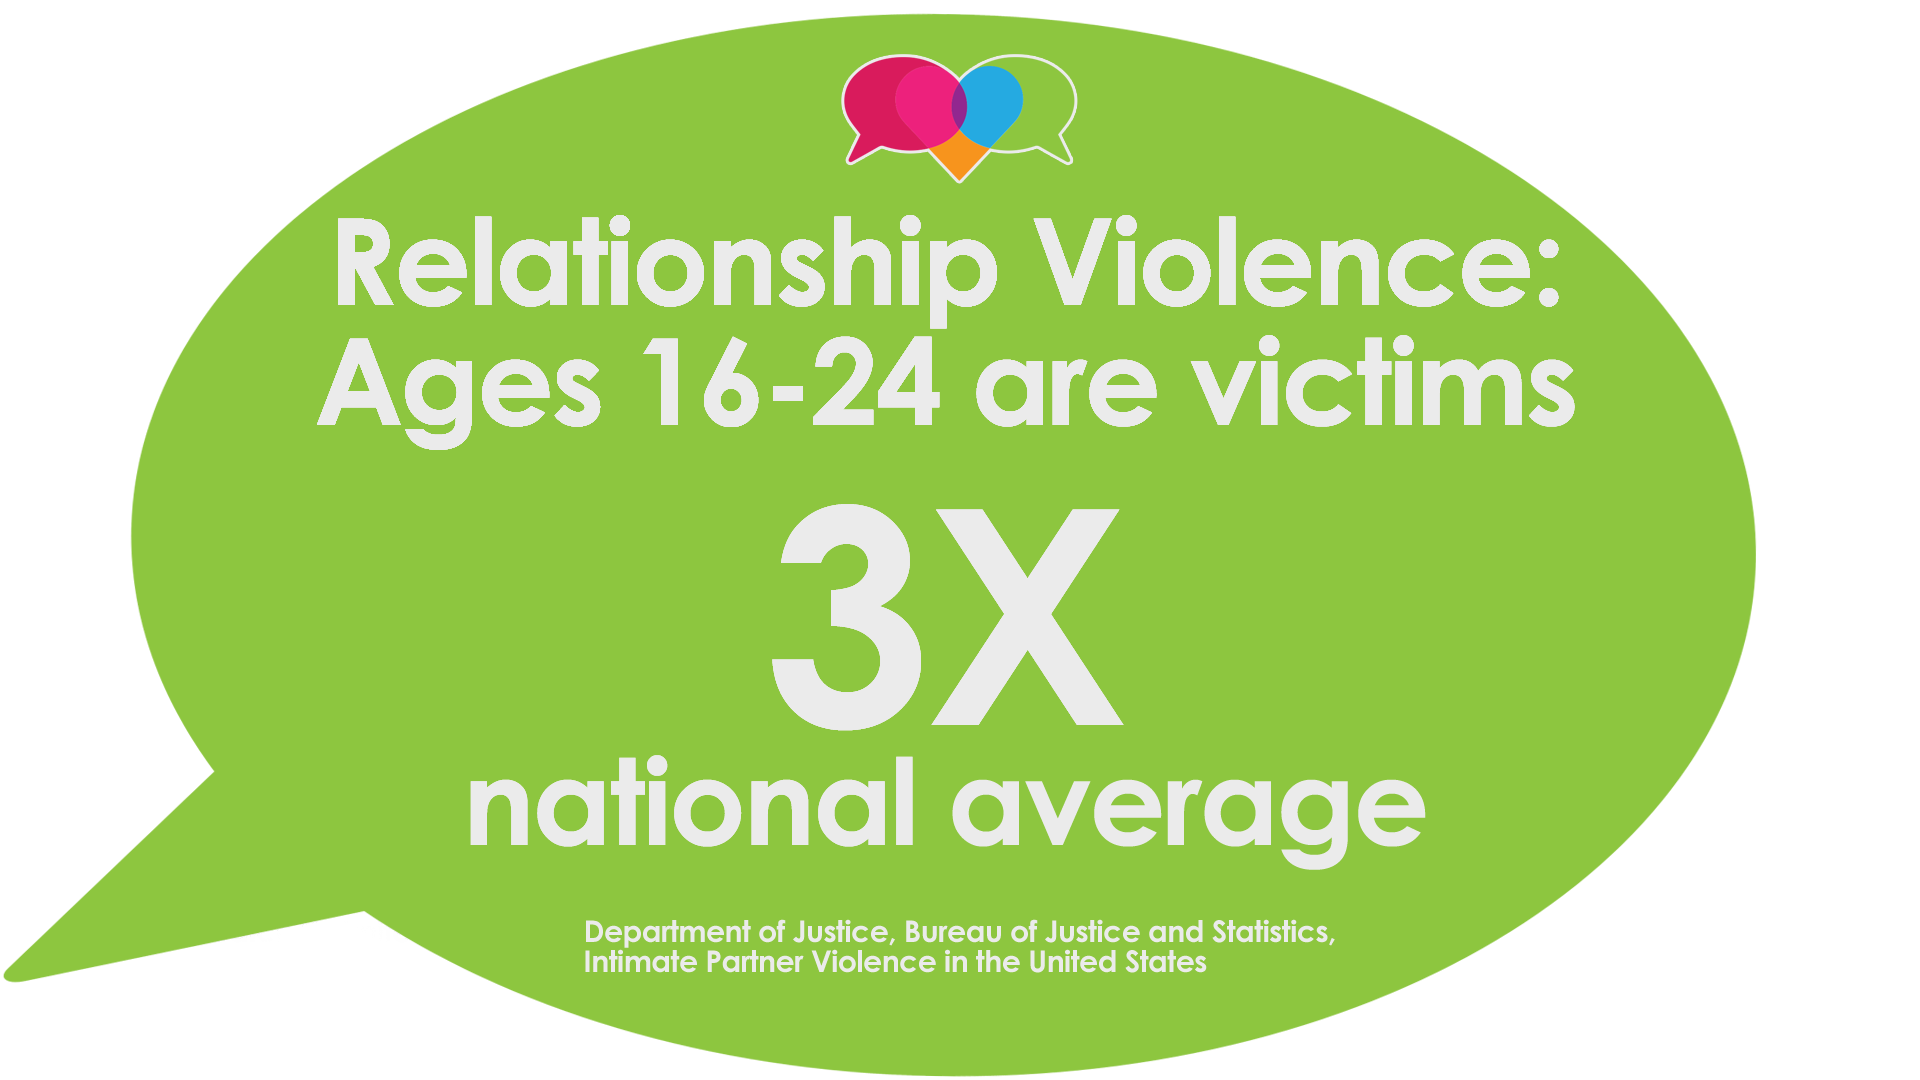 Relationship Violence: Ages 16 - 24 are victims 3 times the national average